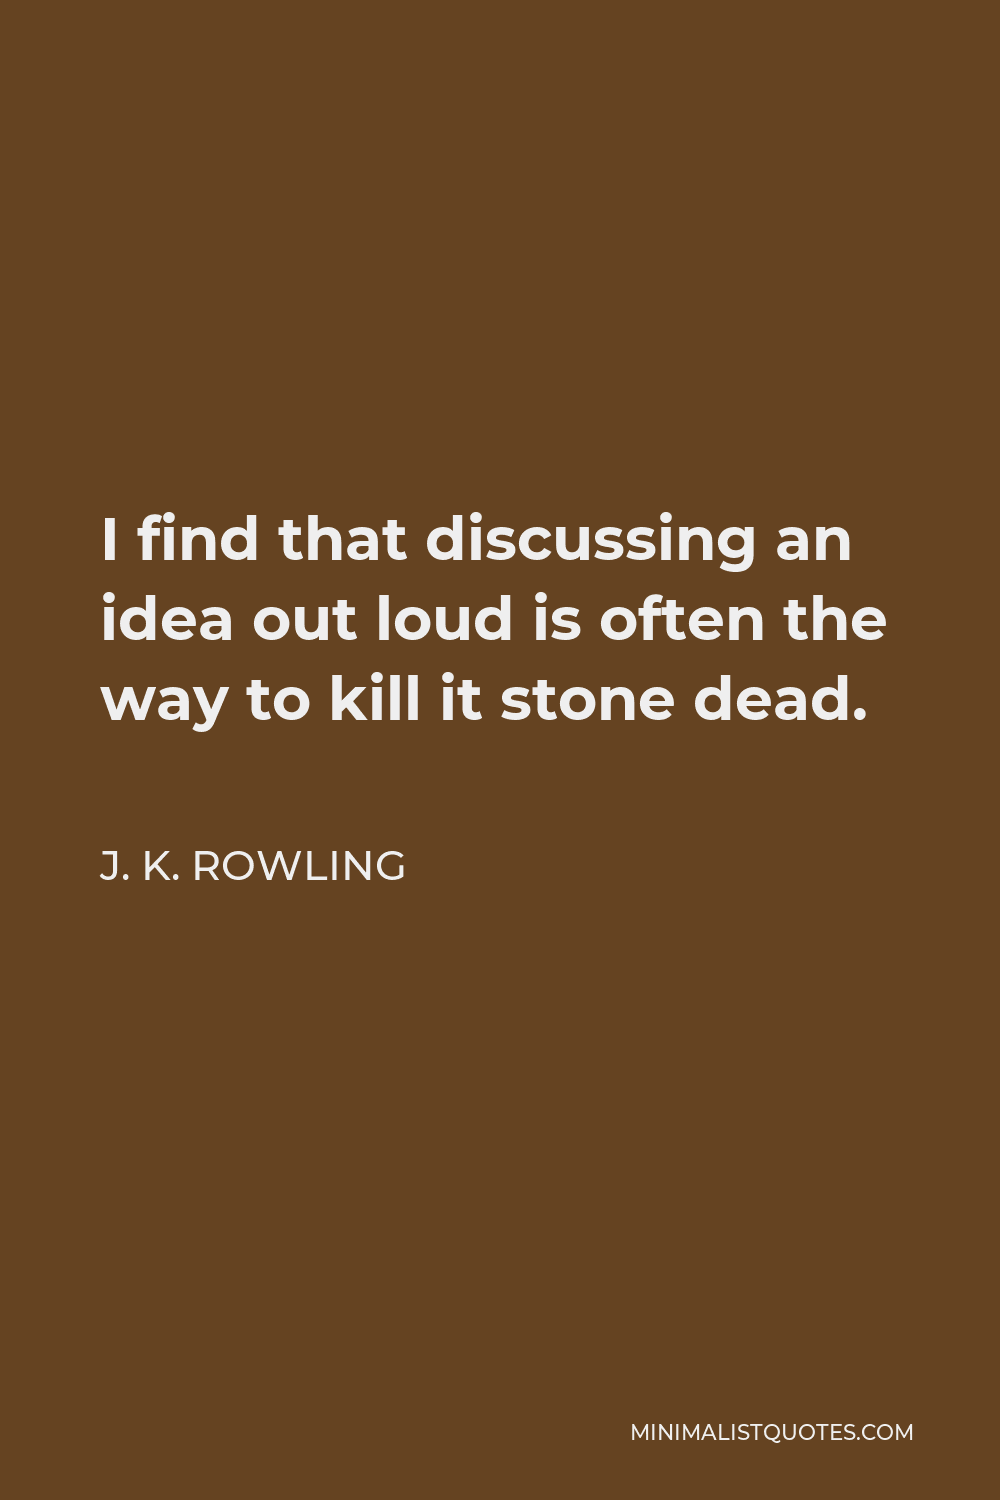 J. K. Rowling Quote - I find that discussing an idea out loud is often the way to kill it stone dead.